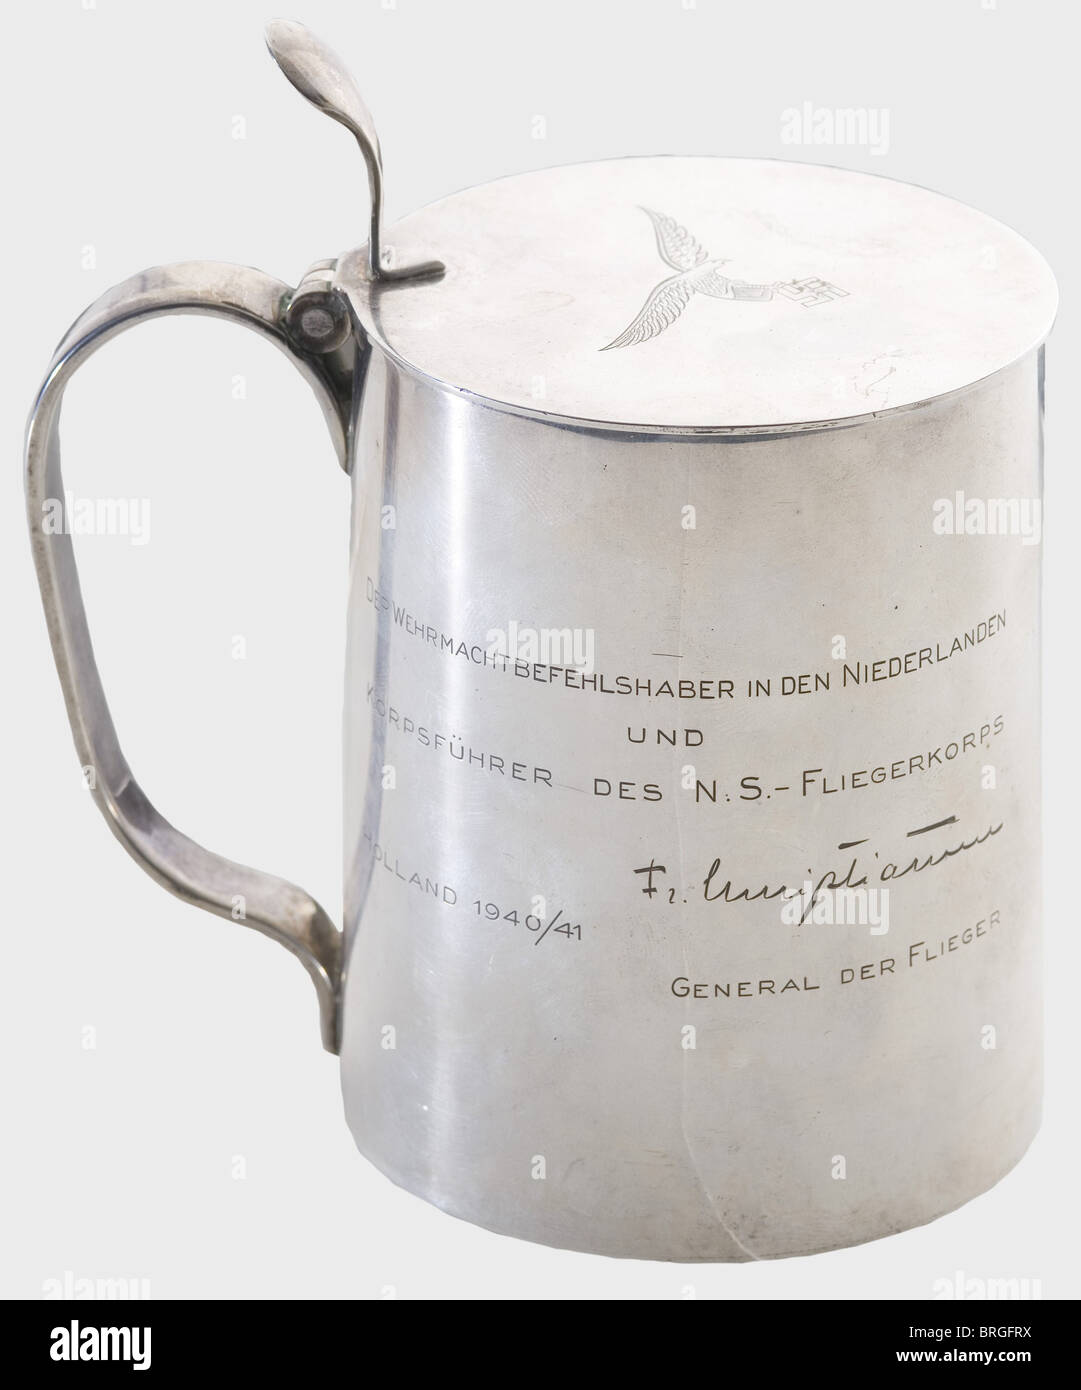 Fregattenkapitän Carl Christiansen(1884 - 1969),a silver gift tankard from his brother Friedrich Christiansen Tapers slightly toward top with an engraving on right side,'Der Wehrmachtsbefehlhaber in den Niederlanden und Korpsführer des N.S.Fliegerkorps Holland 1940/41 - Fr.Christiansen Gerneral der Flieger.'(The Wehrmacht Commander in Netherlands and Corps Commander of N.S.Flying Corps Holland 1940/41 - Fr.Christiansen General der Flieger).On left side there is a finely engraved view of a village with lighthouse on beach at t,Additional-Rights-Clearences-Not Available Stock Photo